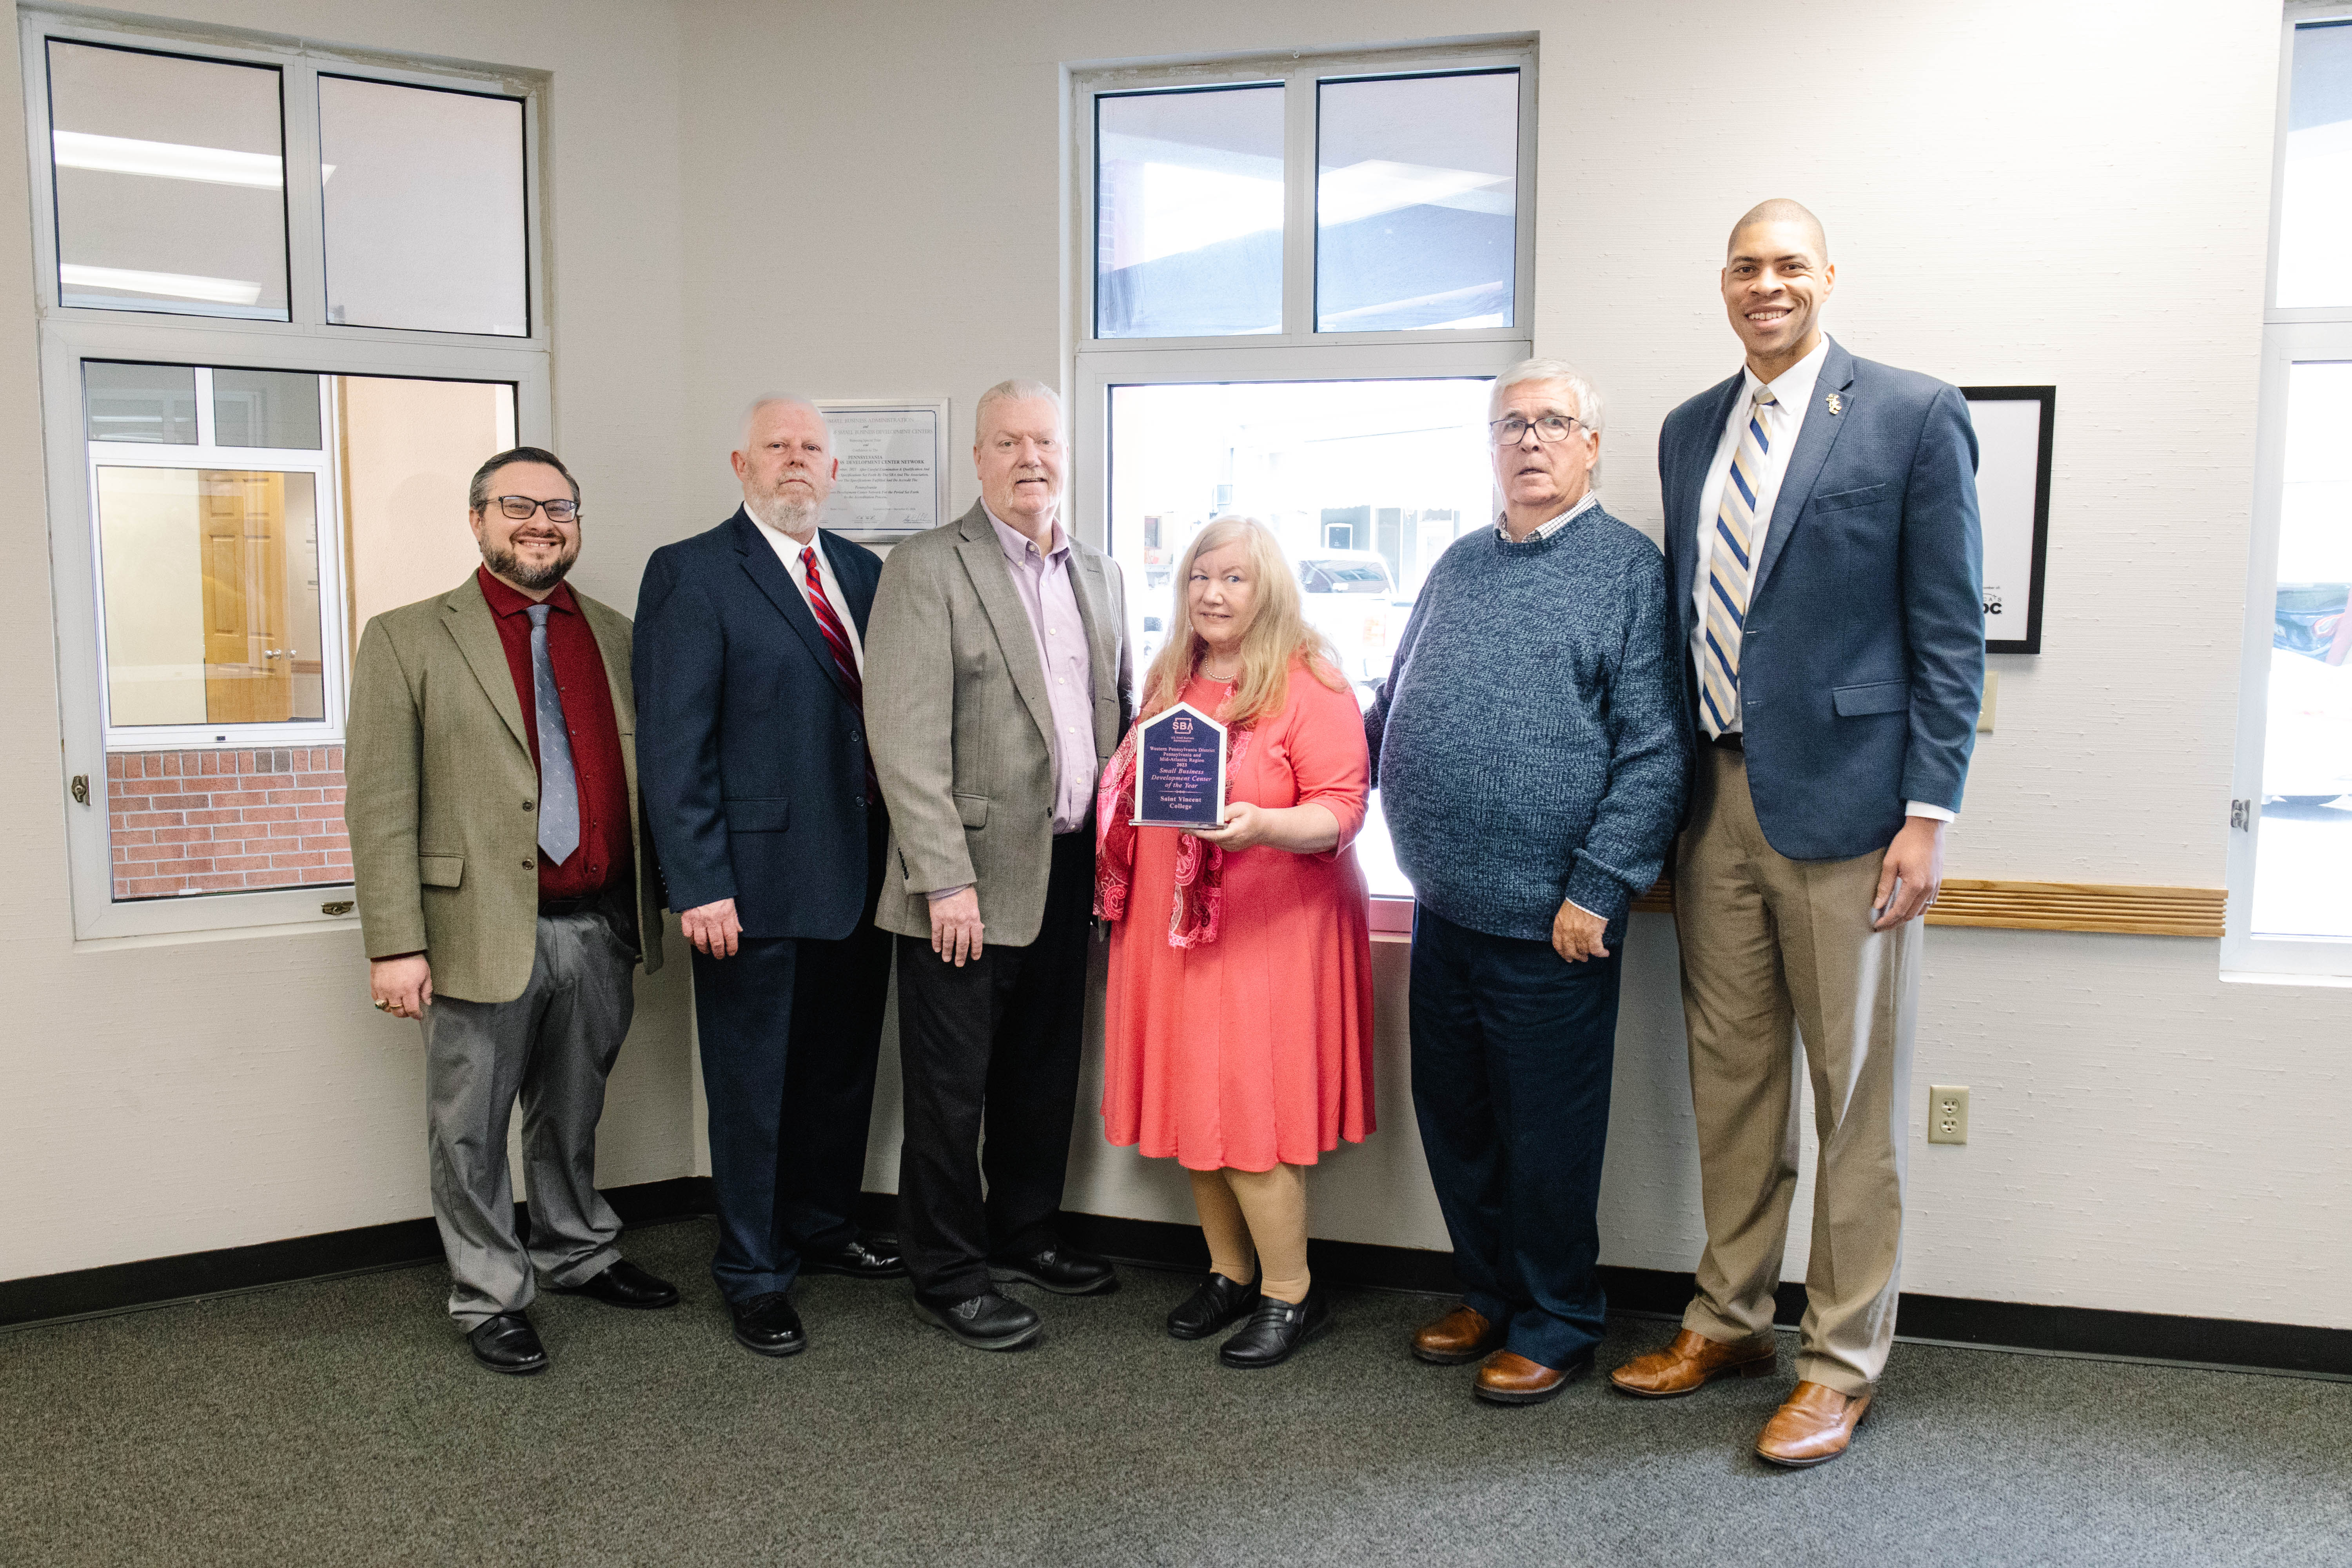 Saint Vincent College Small Business Development receives State, Regional Recognition as the Small Business Development Center of the Year